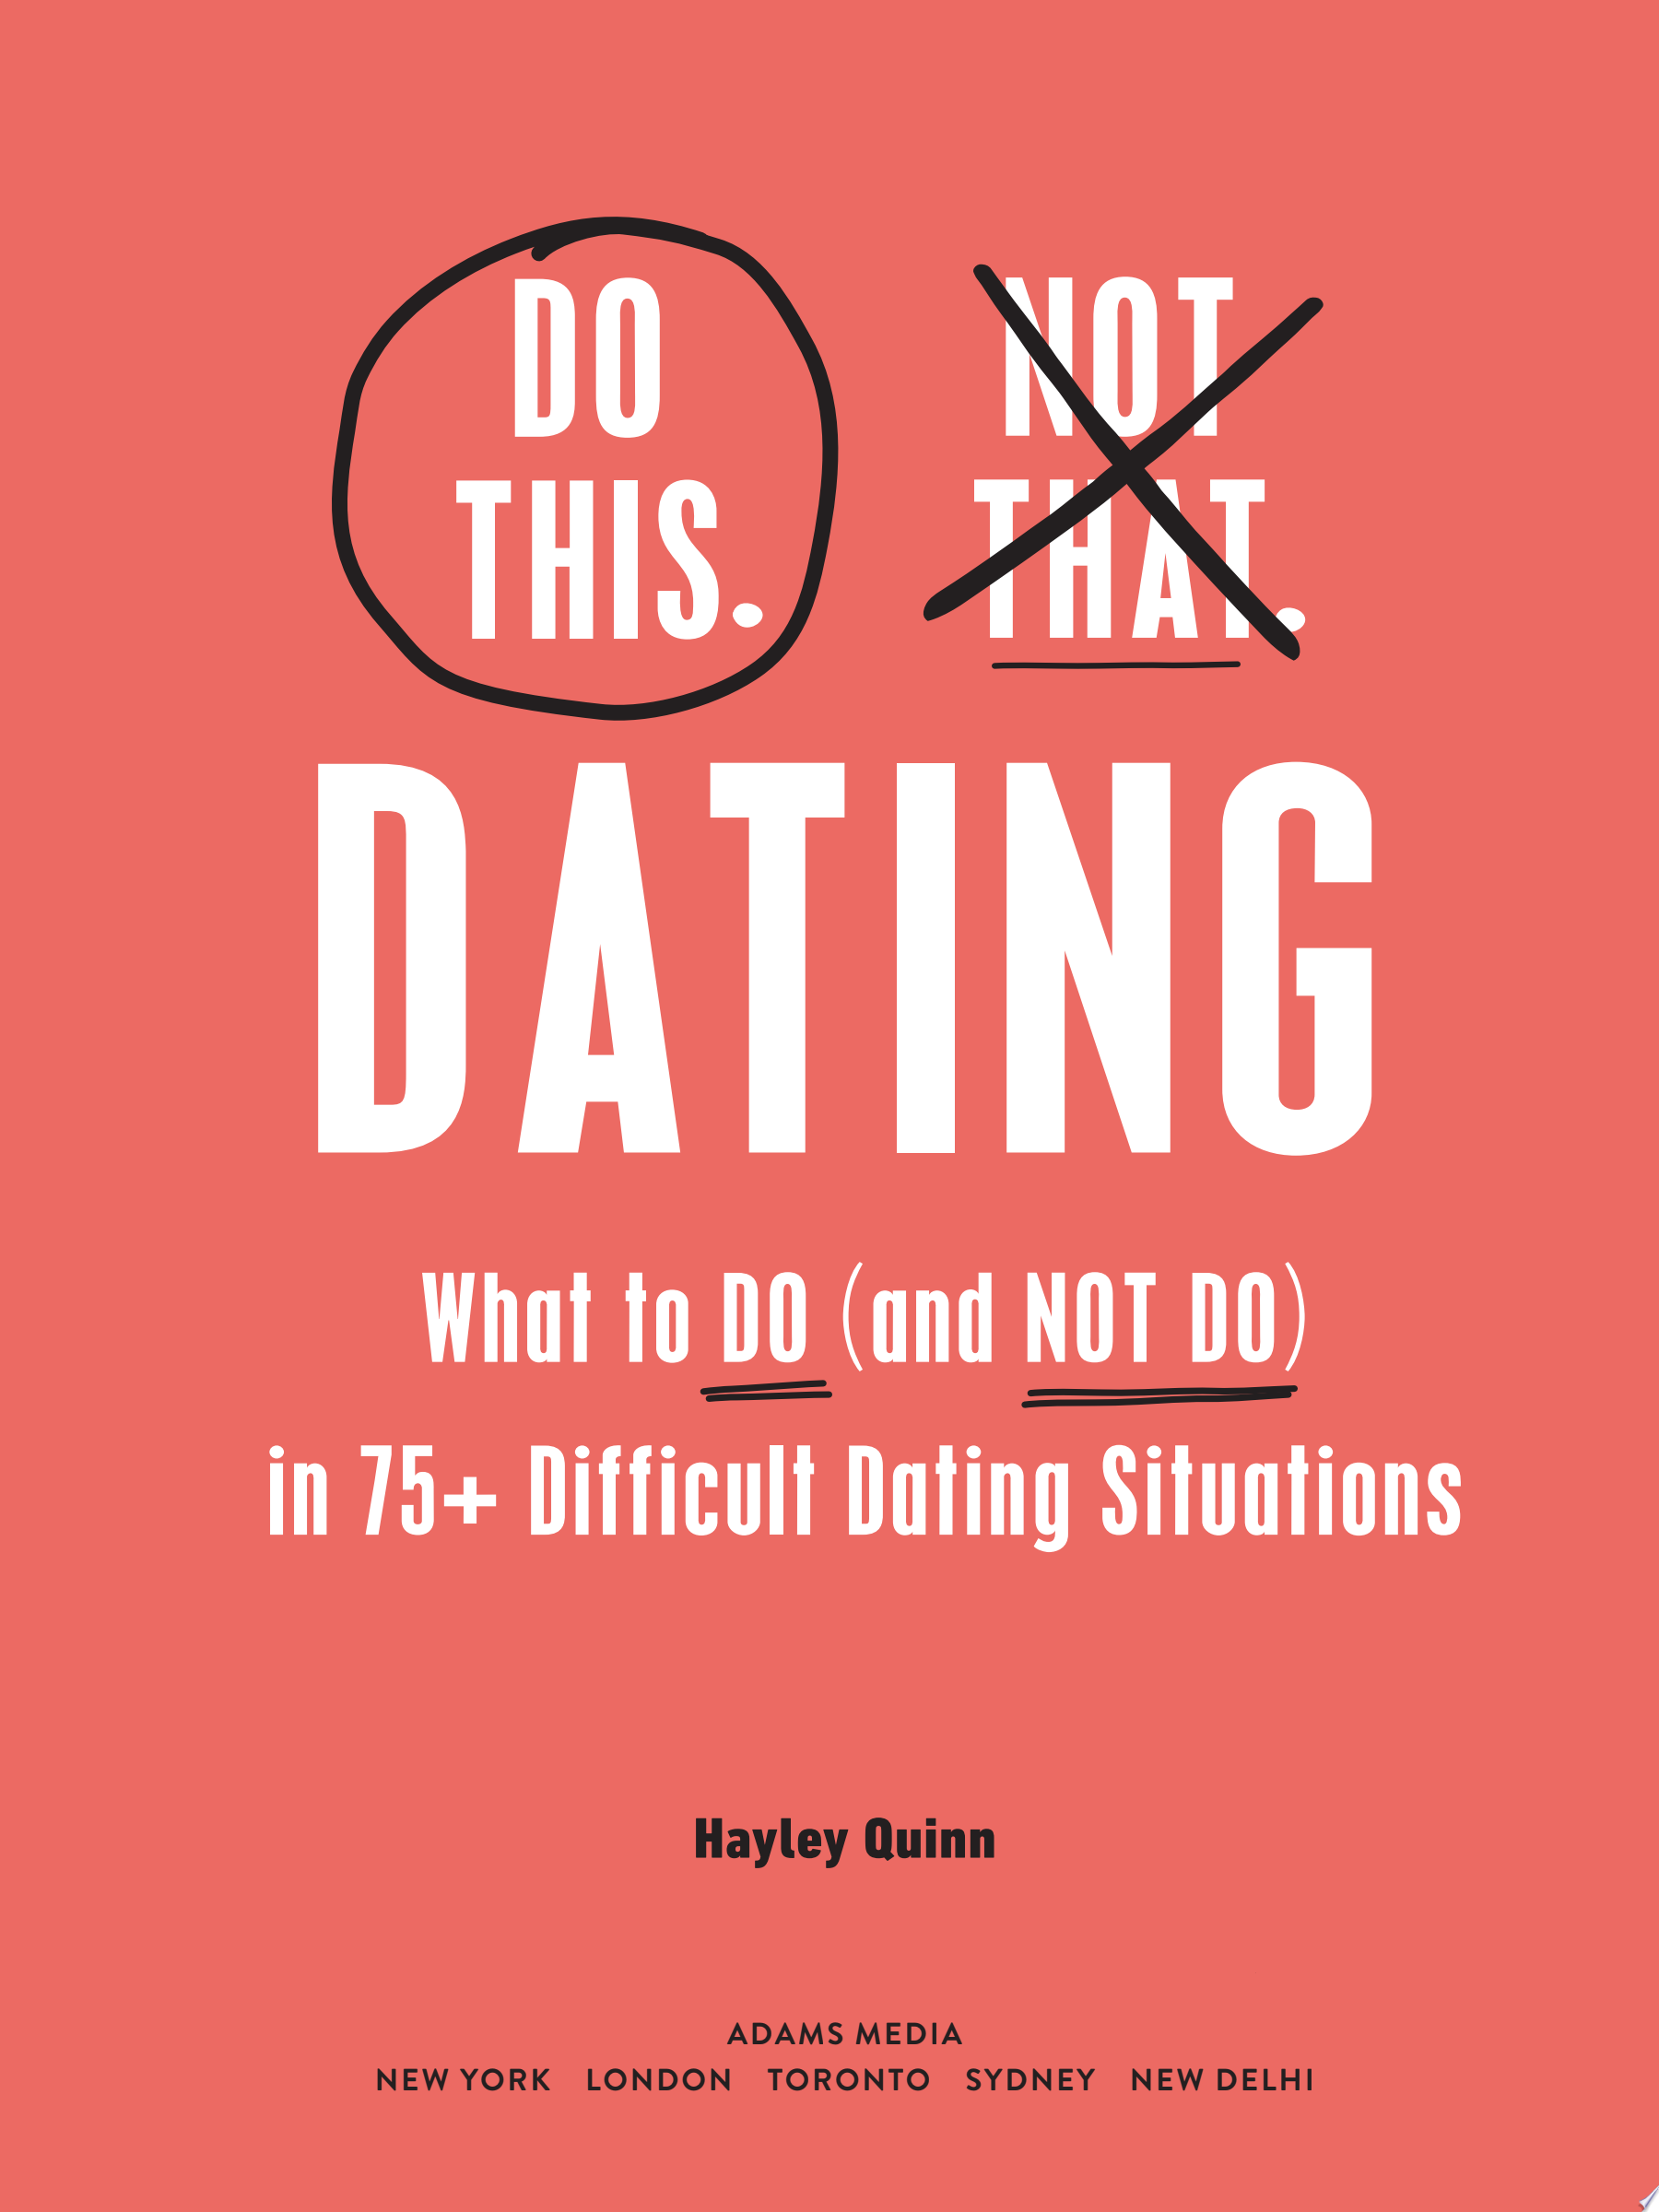 Image for "Do This, Not That: Dating"